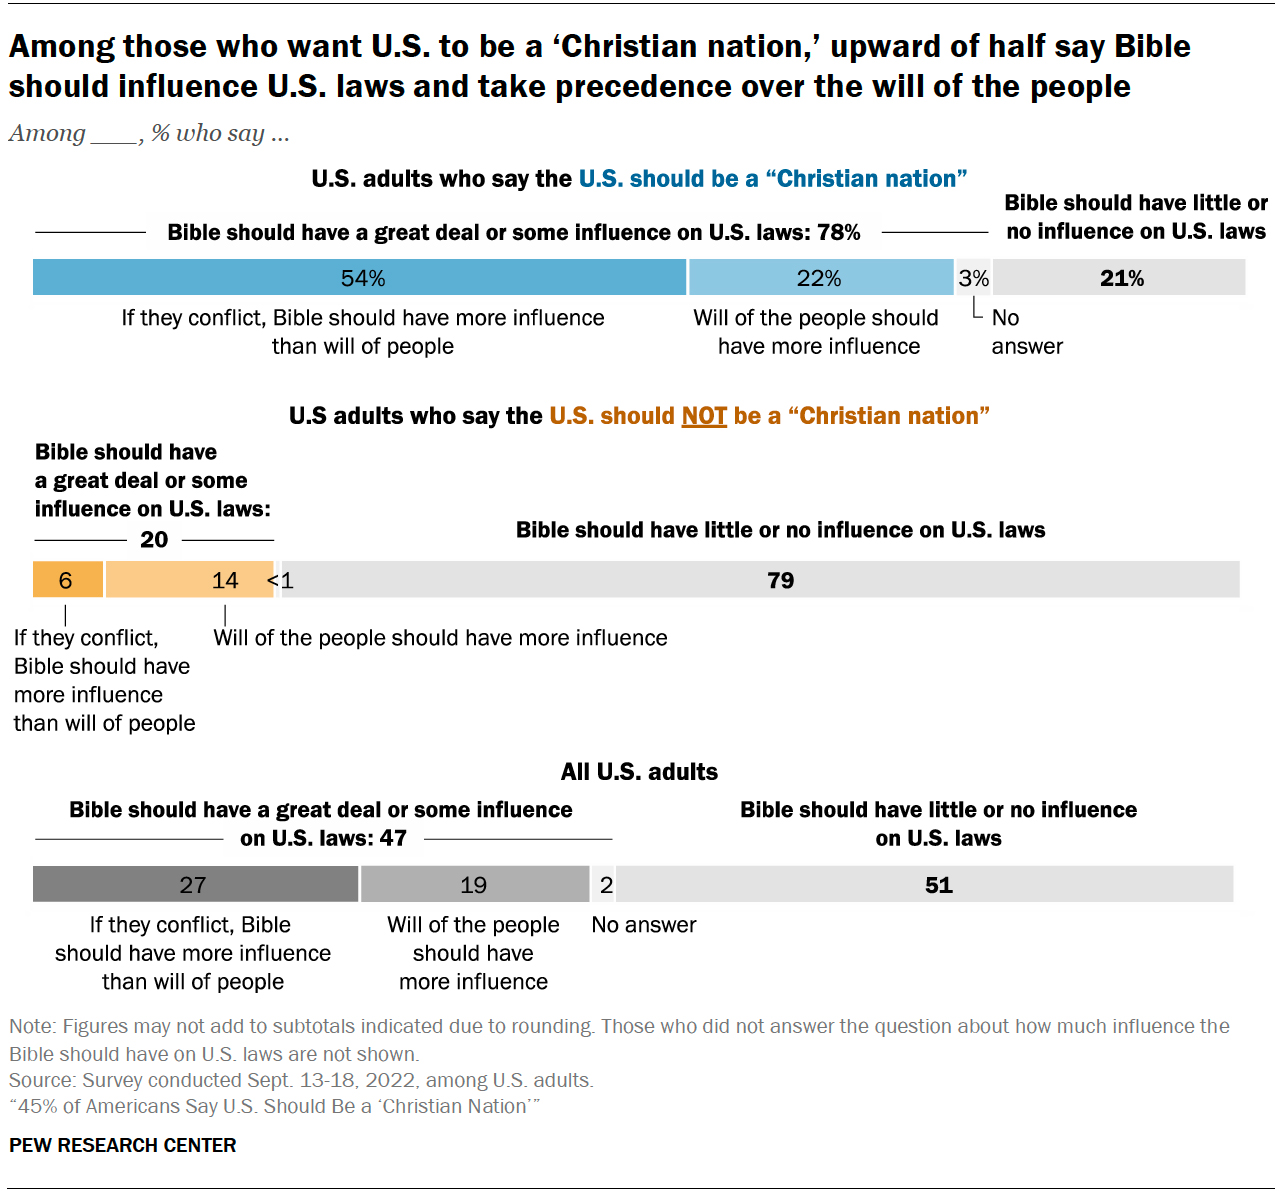 "Among those who want U.S. to be a 'Christian nation,' upward of half say Bible should influence U.S. laws and take precedence over the will of the people" Graphic courtesy of Pew Research Center